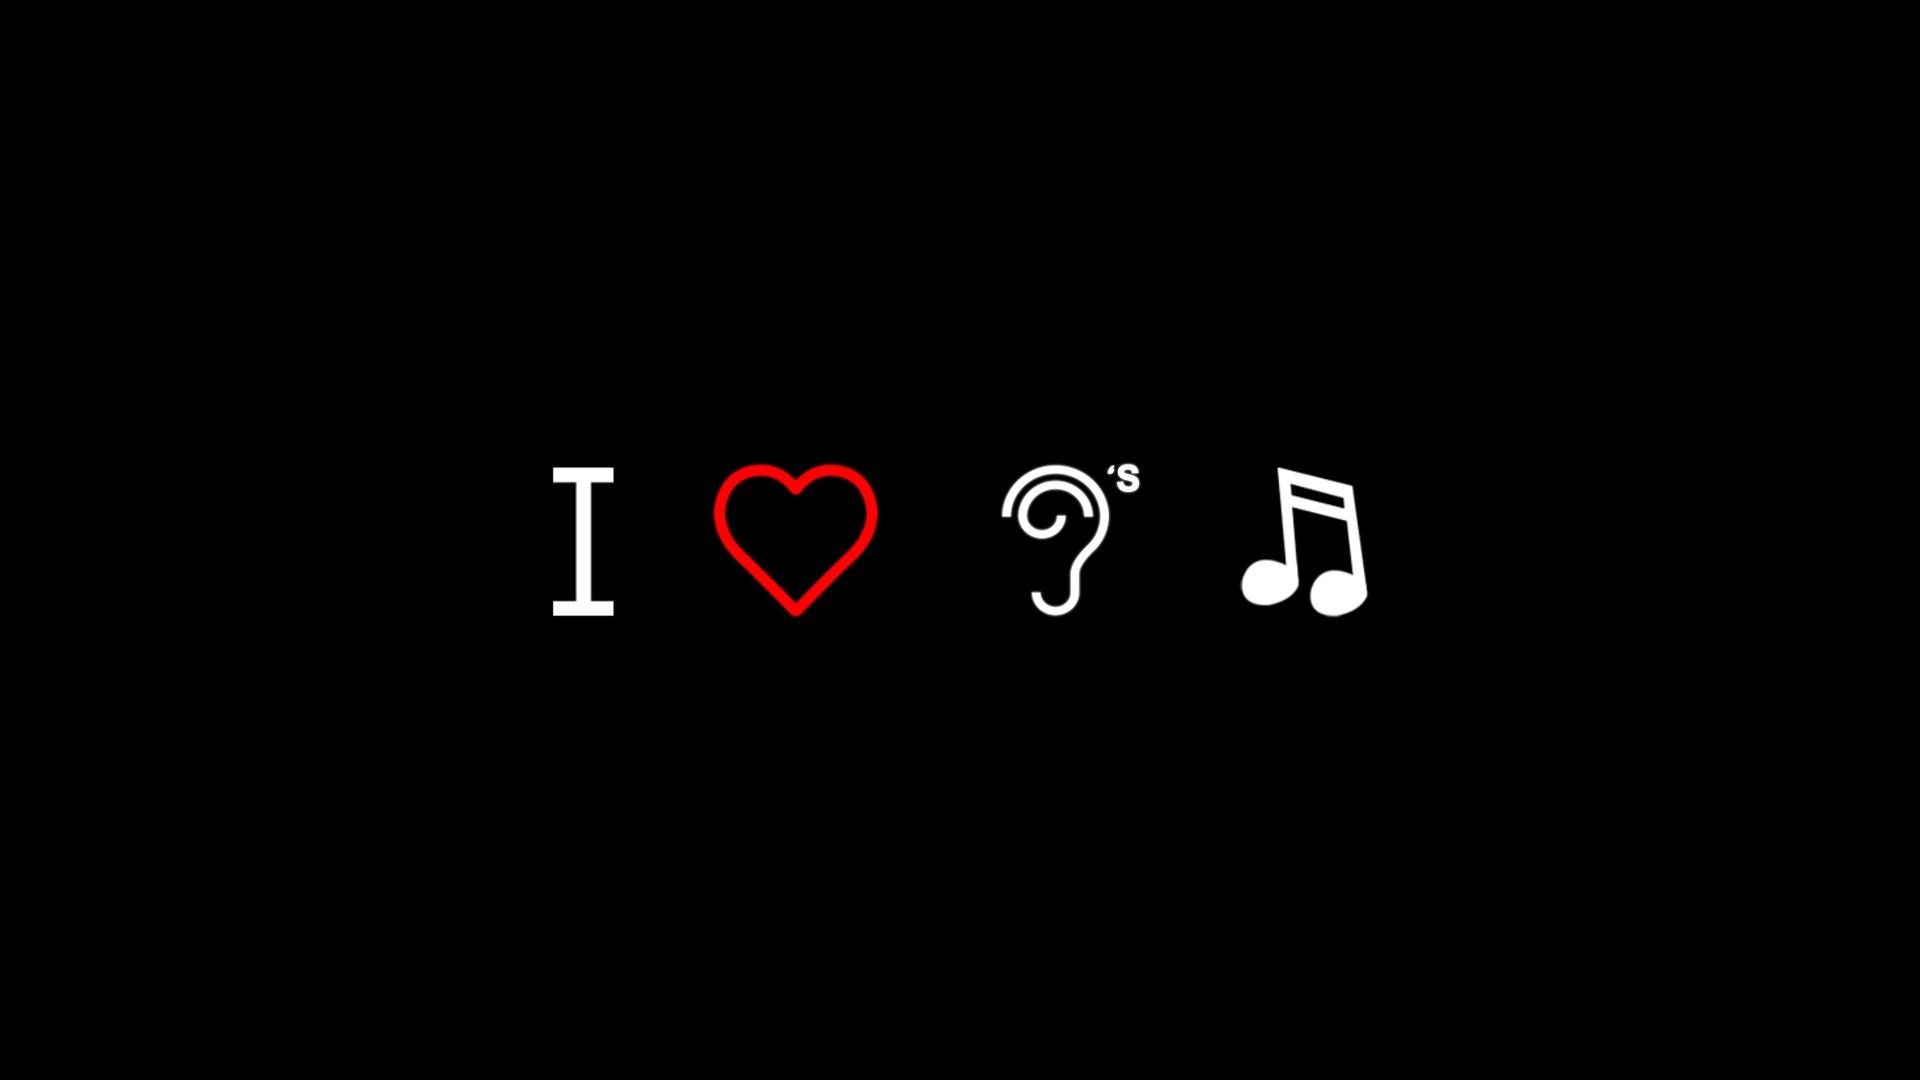 General 1920x1080 minimalism musical notes heart (design) simple background music black background